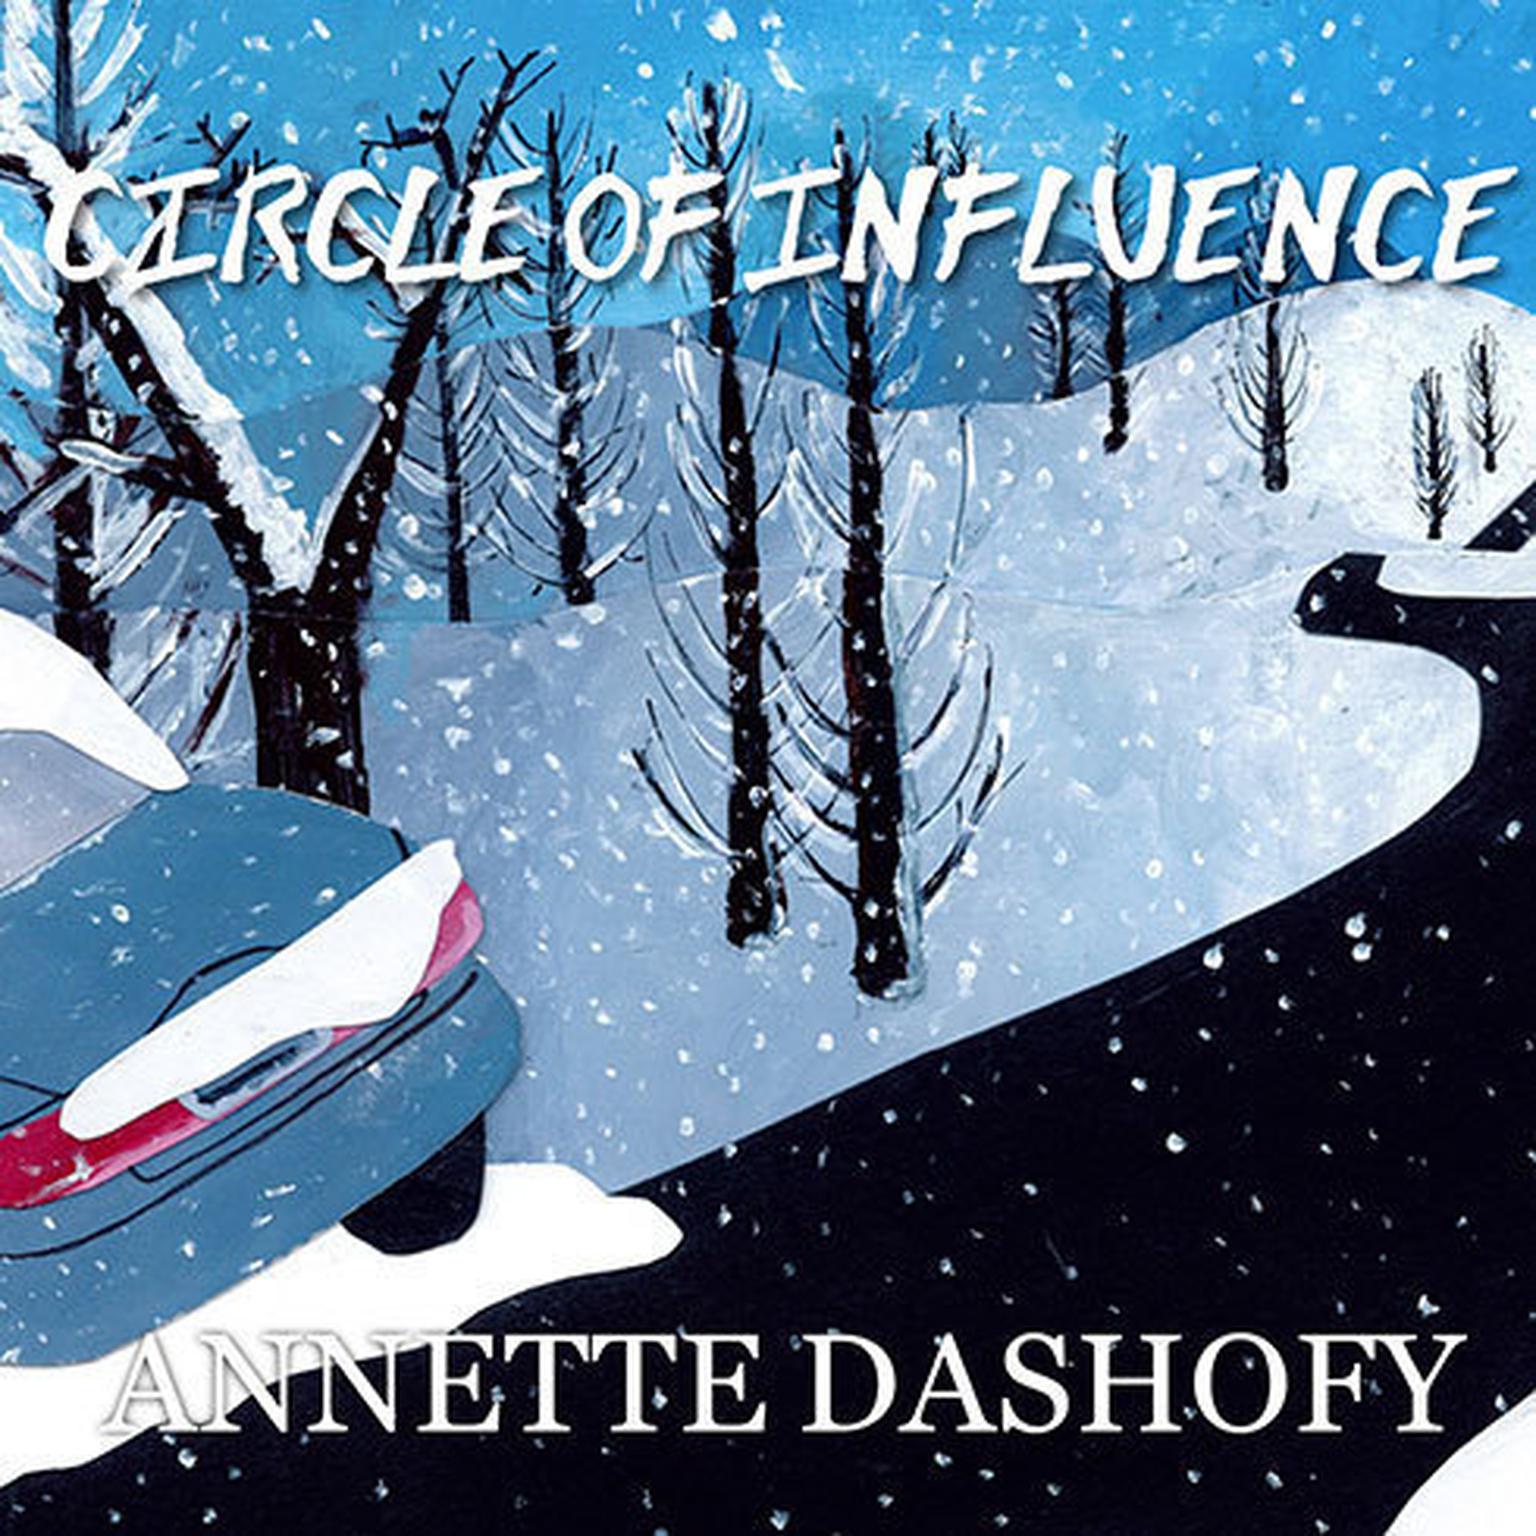 Circle of Influence Audiobook, by Annette Dashofy